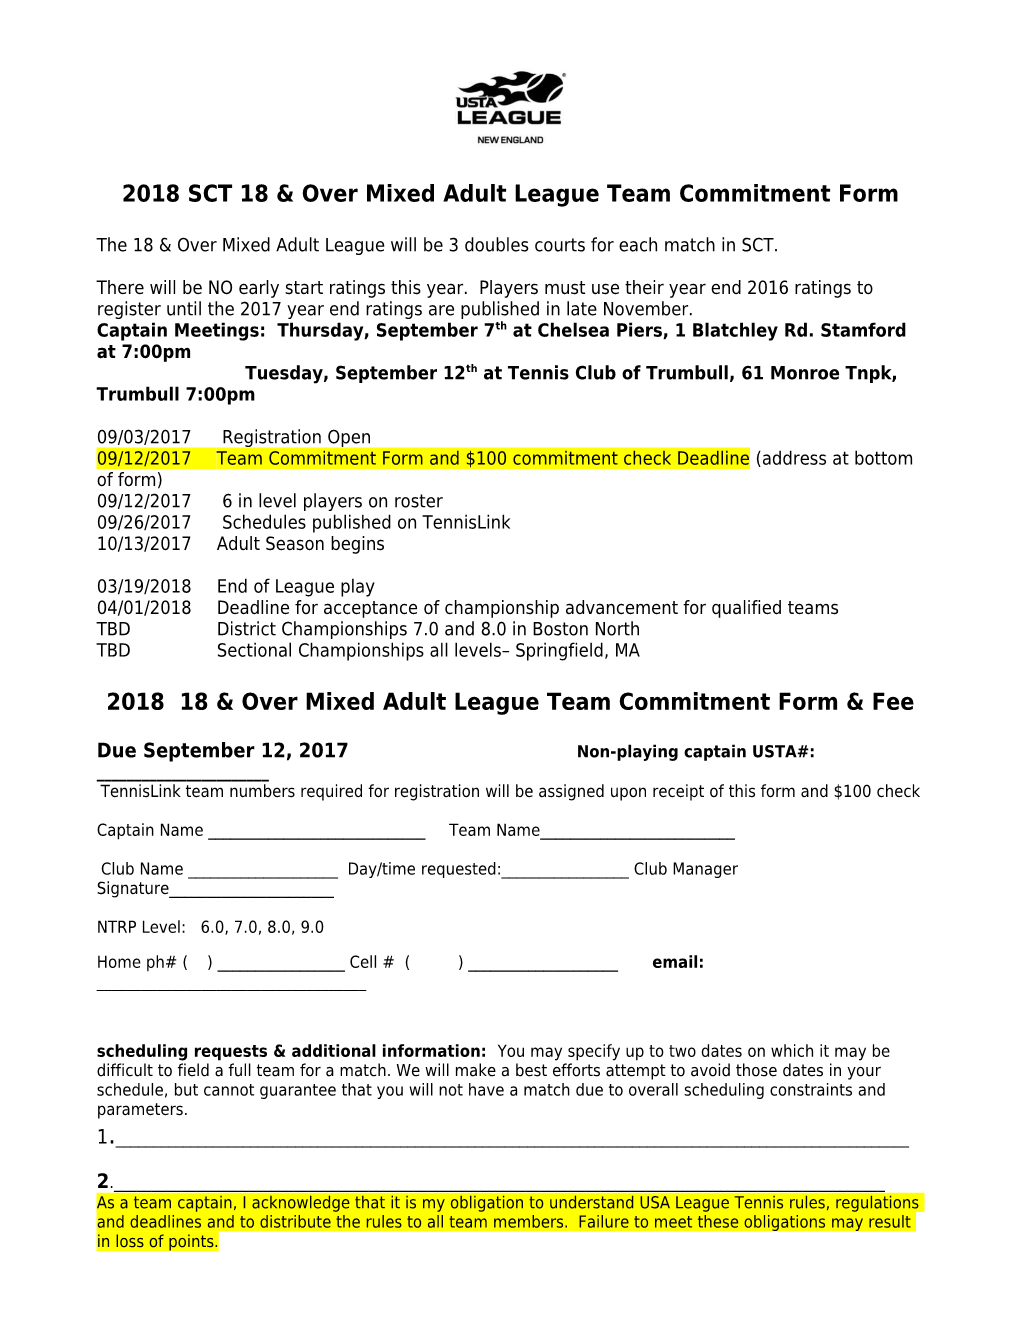 2018 SCT 18 & Over Mixed Adult League Team Commitment Form